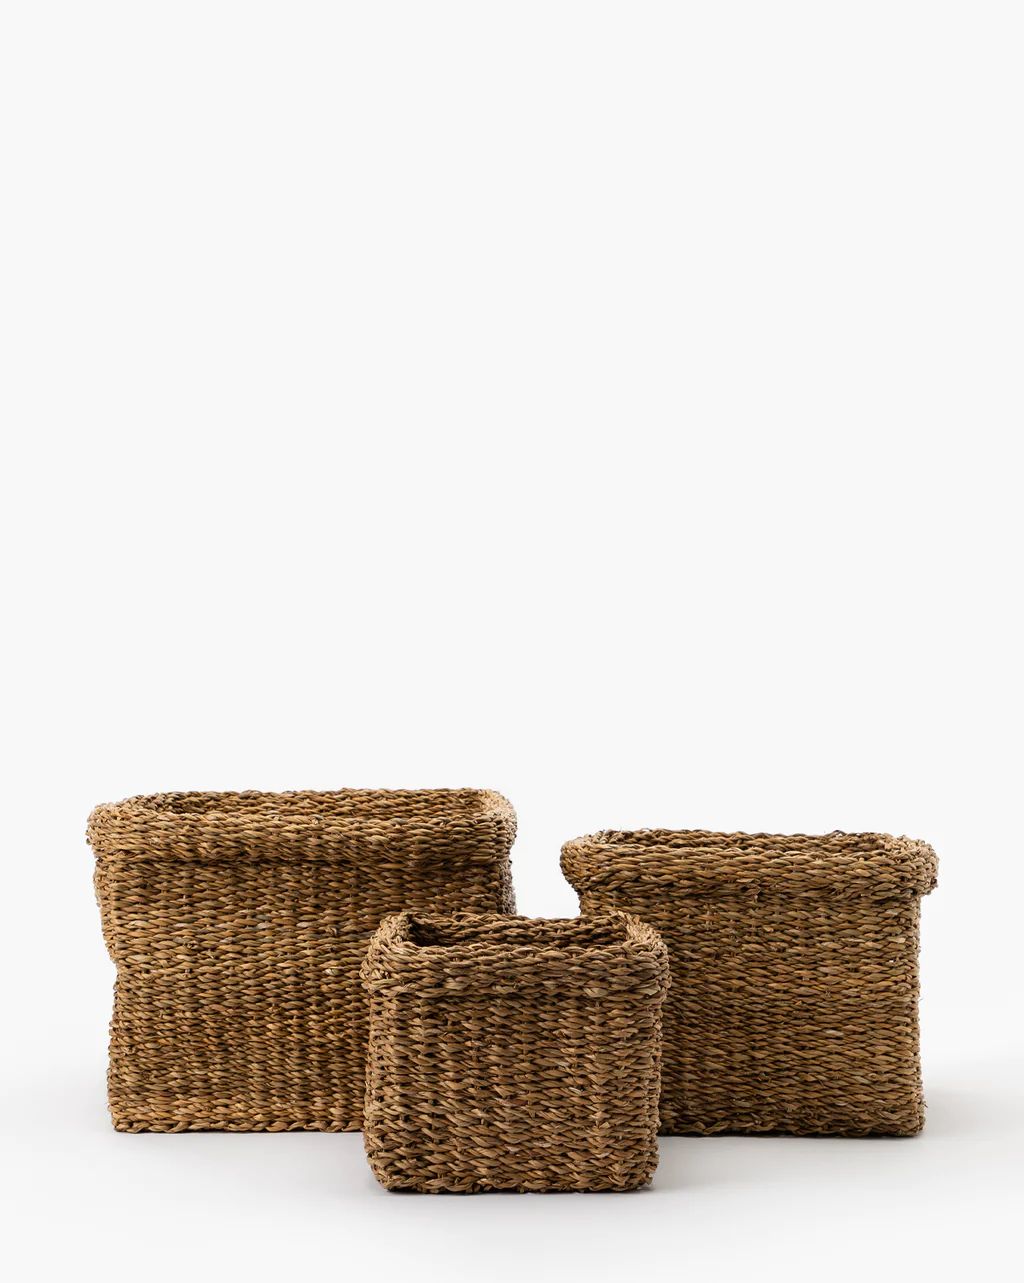 Emberly Woven Basket | McGee & Co.